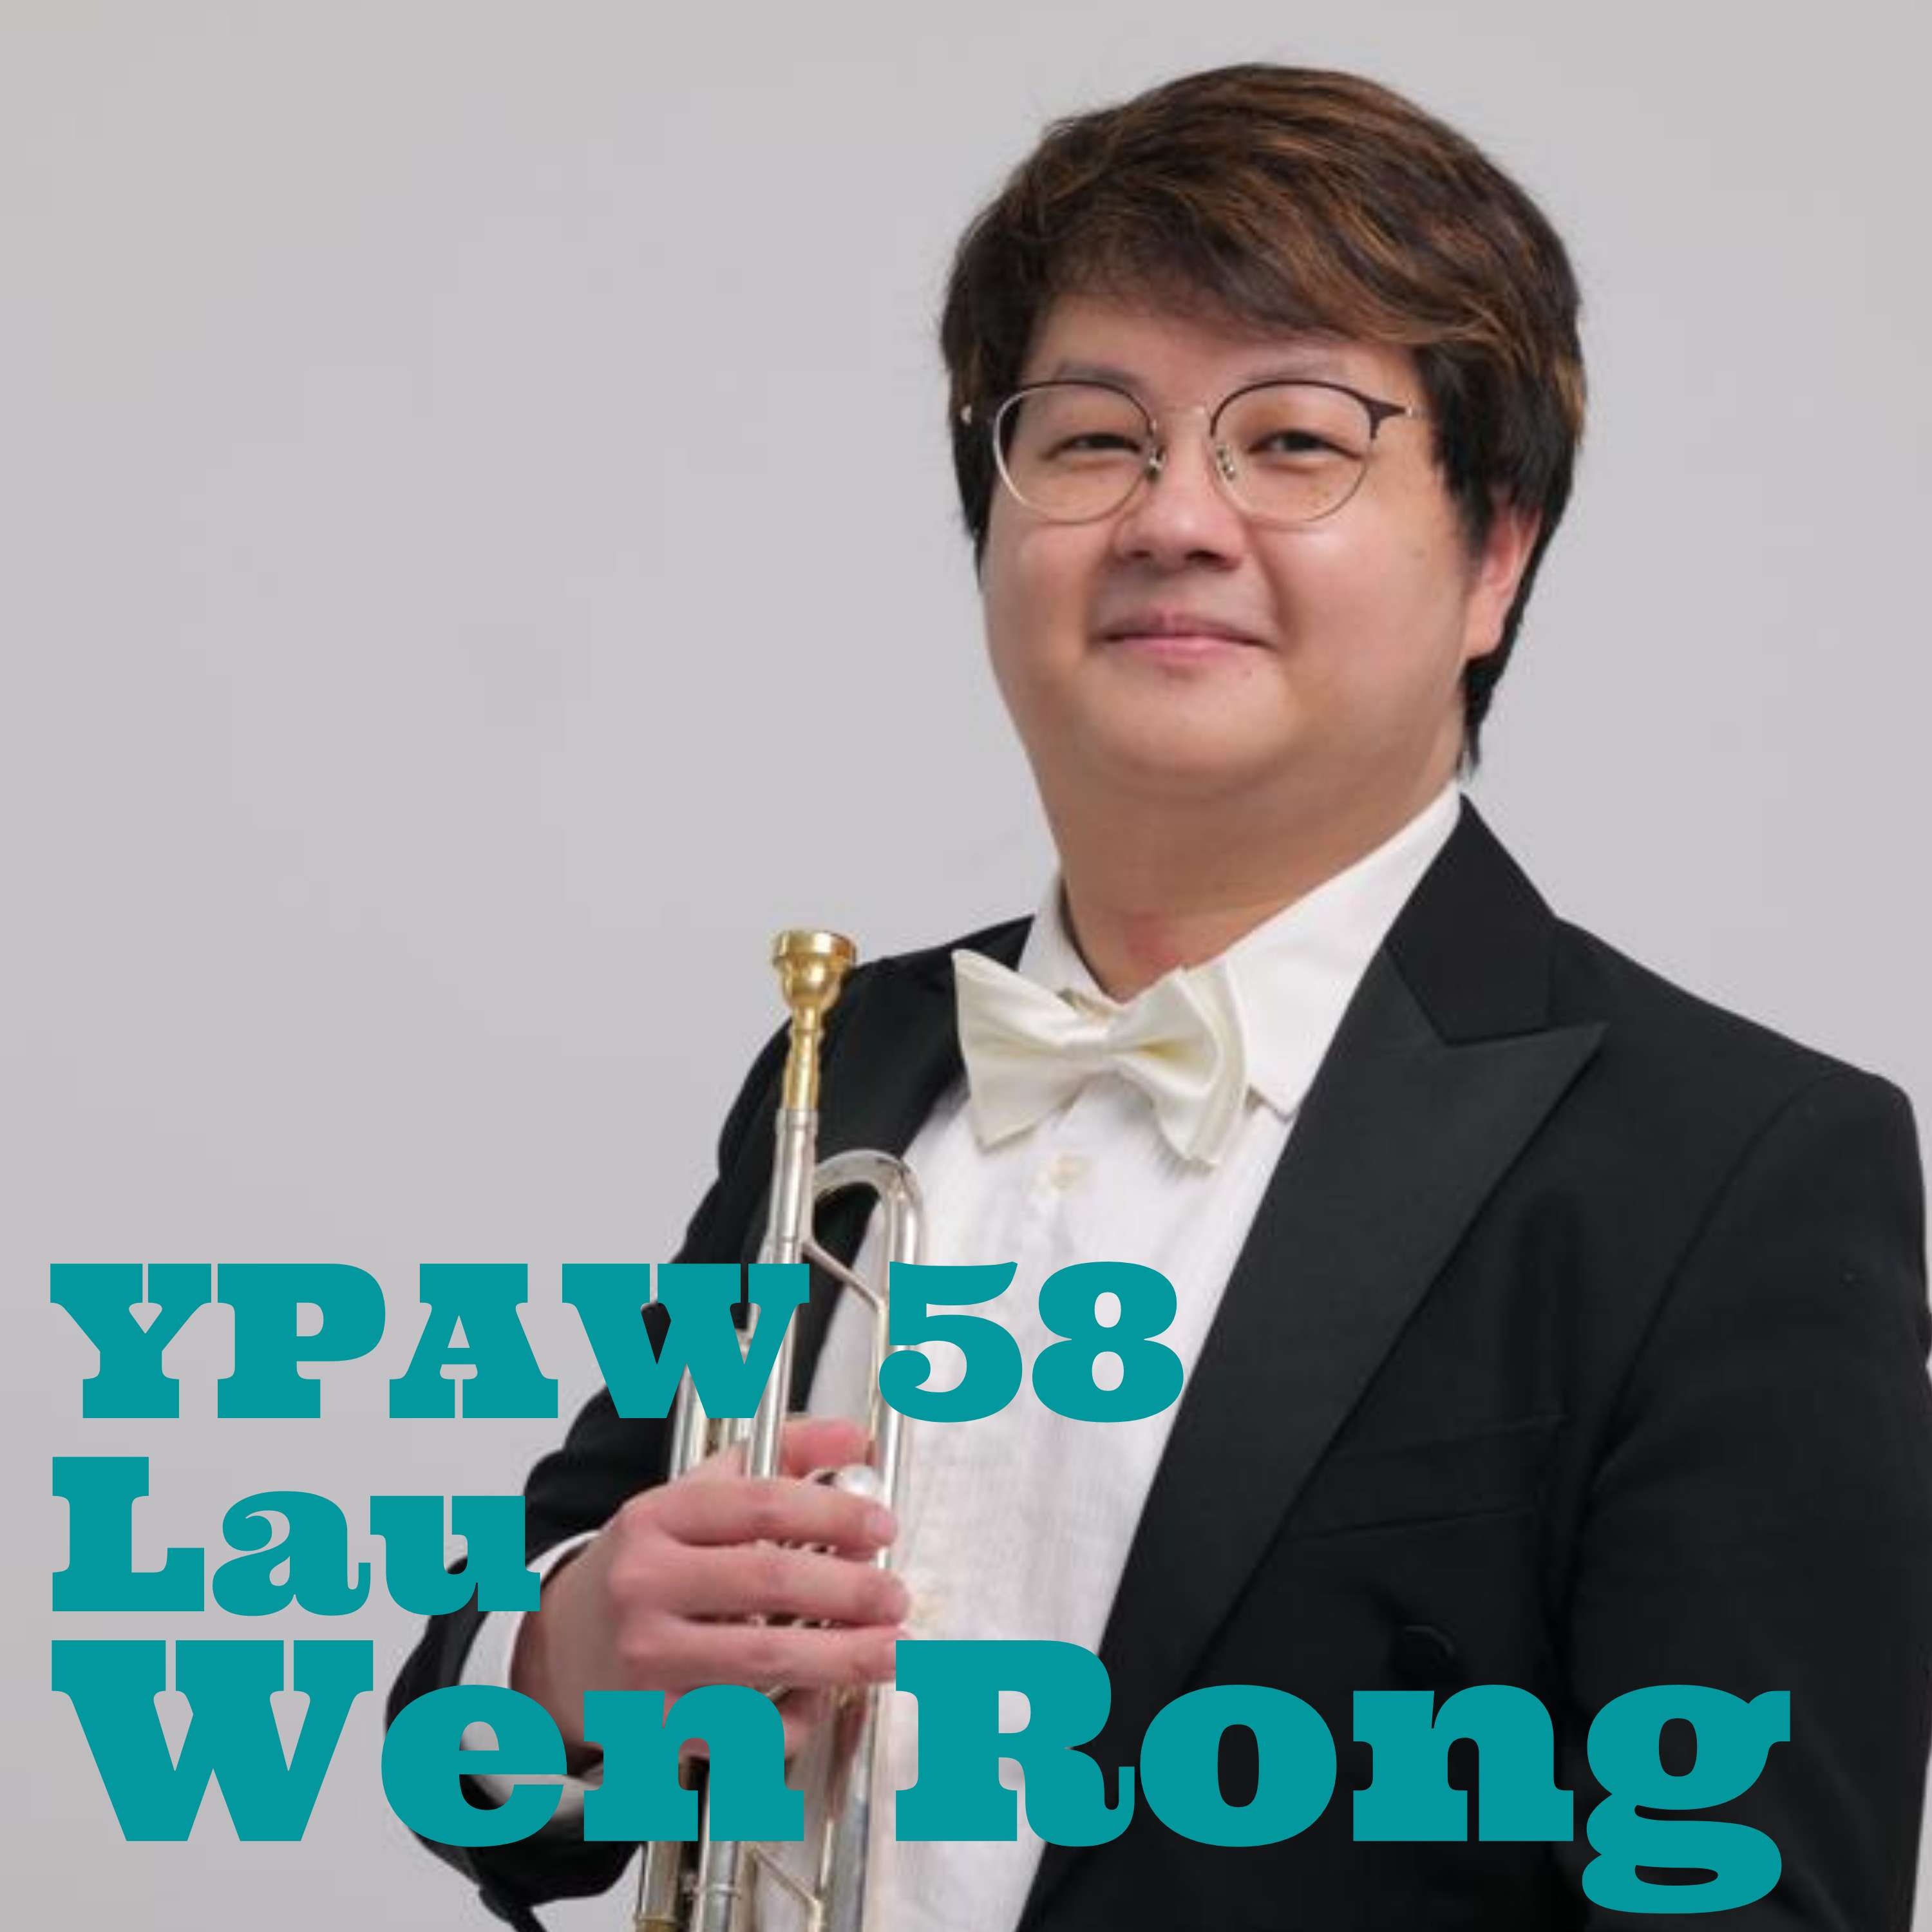 YPAW 58: Lau Wen Rong - Love for Trumpet, Hating Classical Music, Impact of being in a Youth Orchestra, Coping with Self-Imposed Pressure, Perfection VS Excellence, Staying in the Present